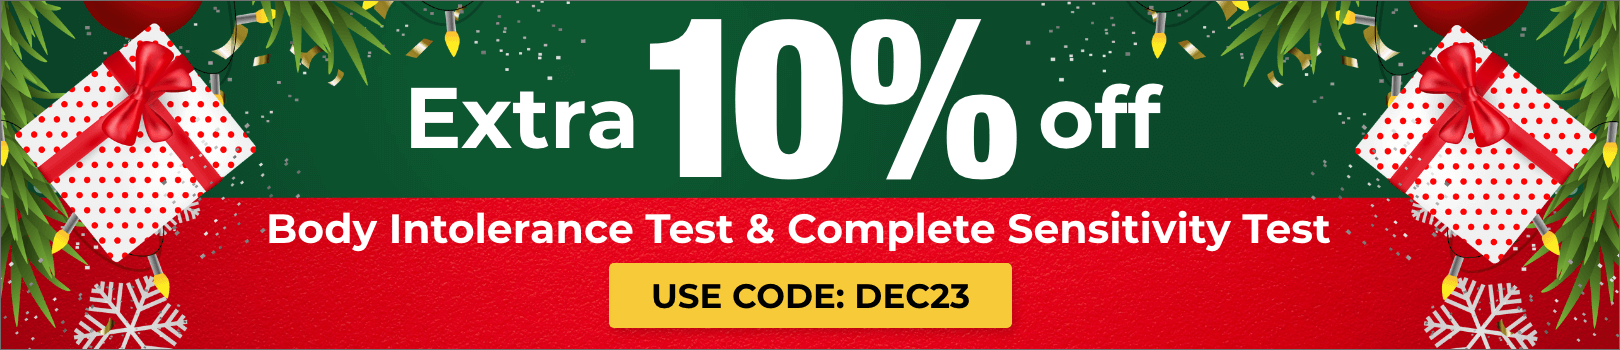 Get an extra 10% off Body Intolerance Test & Complete Sensitivity Test